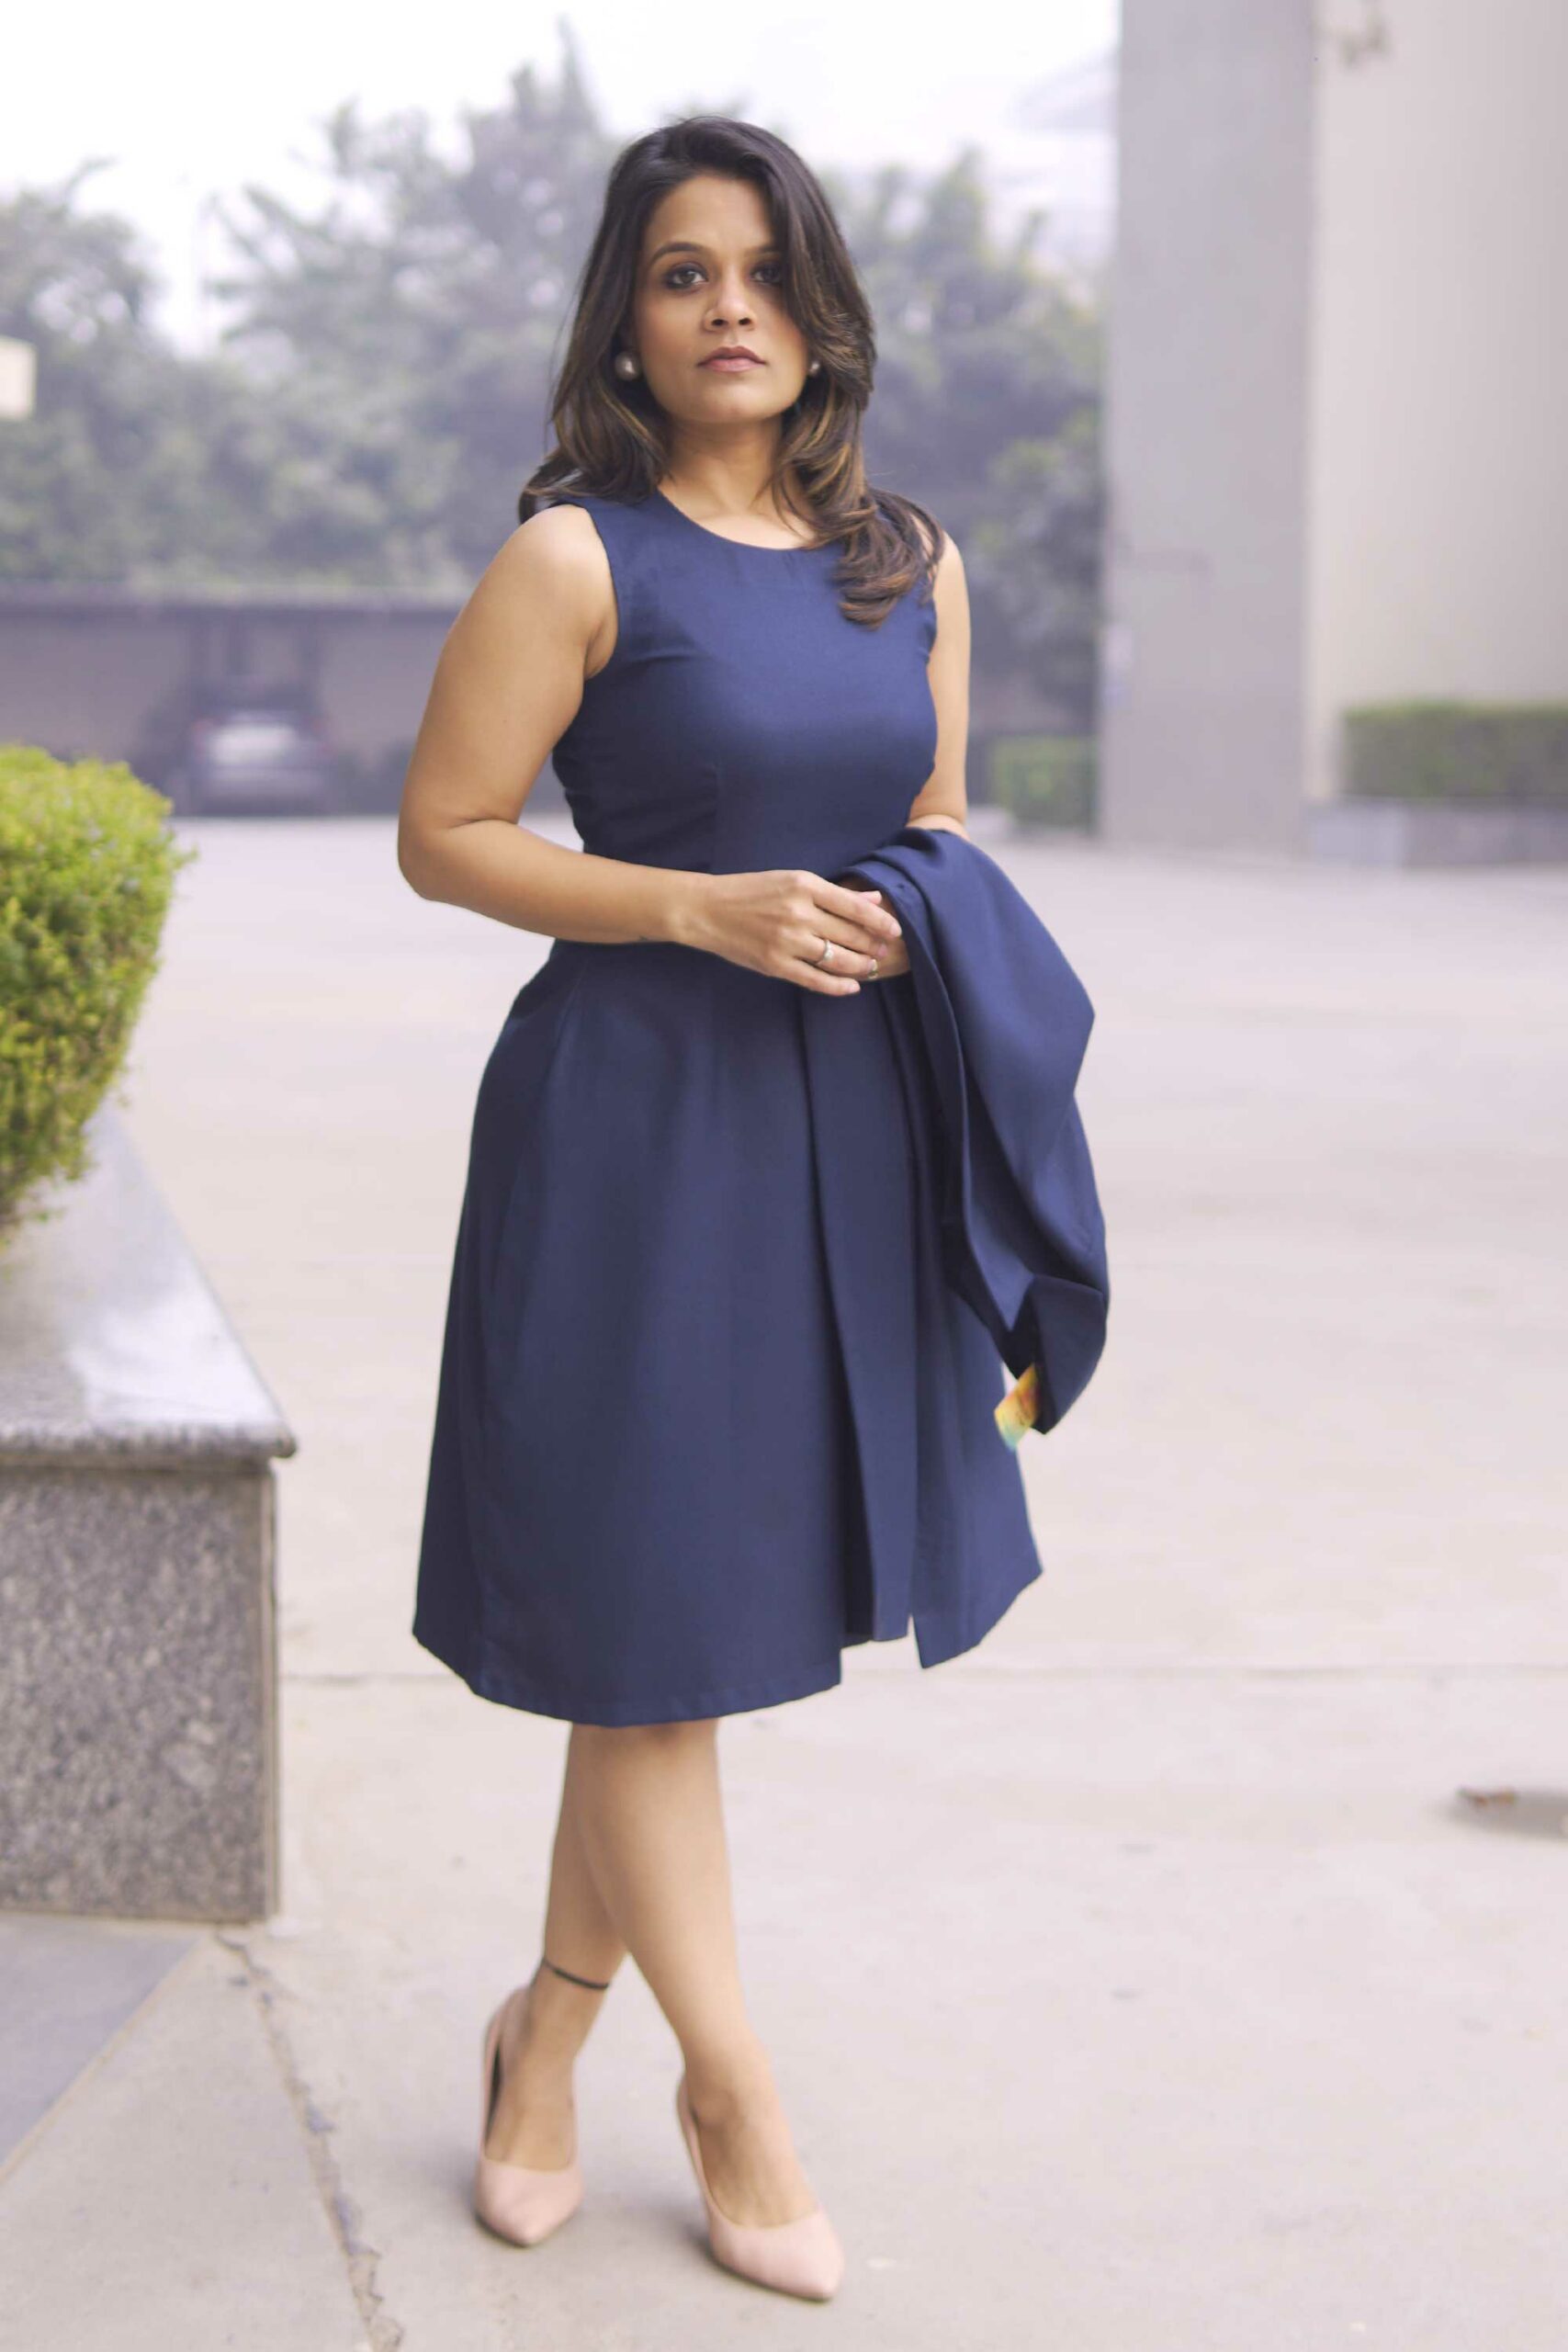 Tulip Dress in Navy Blue - The BMD Shop - Your Bridesmaid Dresses Specialist